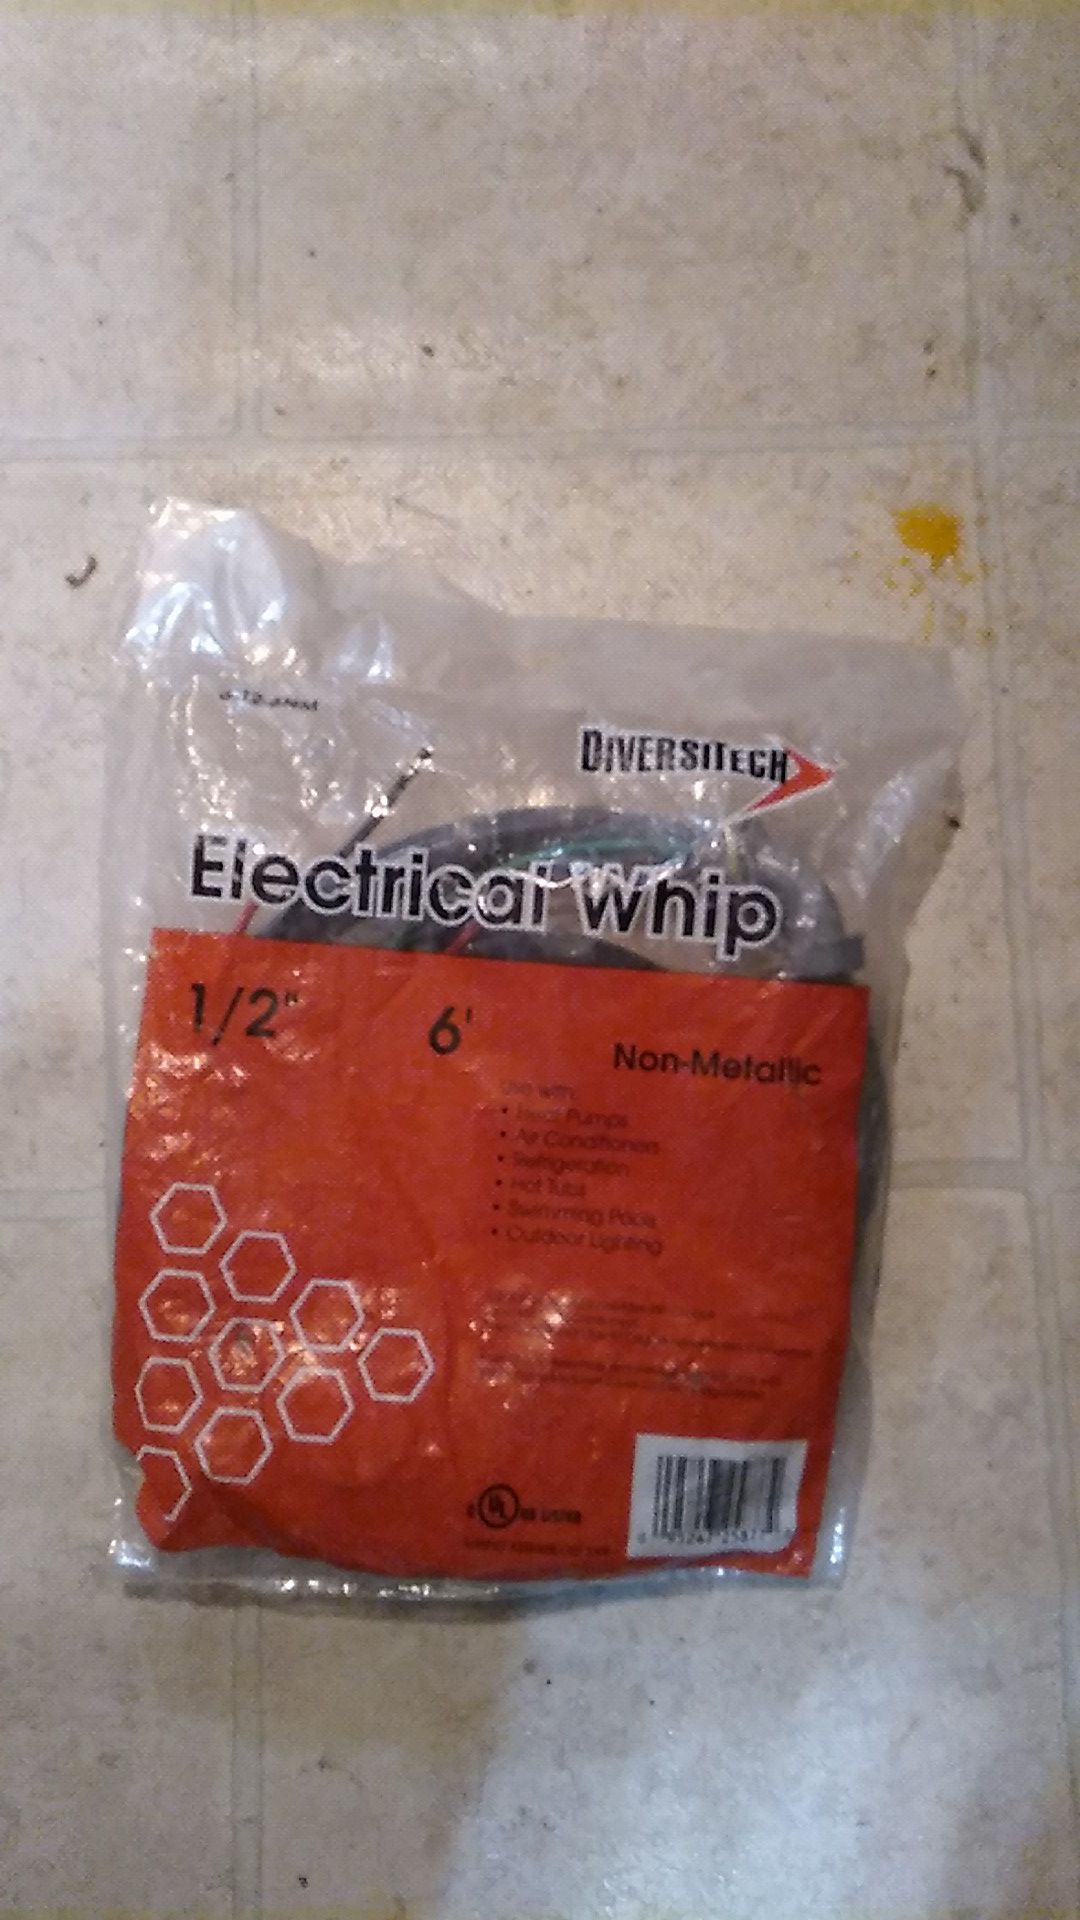 DIVERSITEC Electrical Whip 1/2" 6